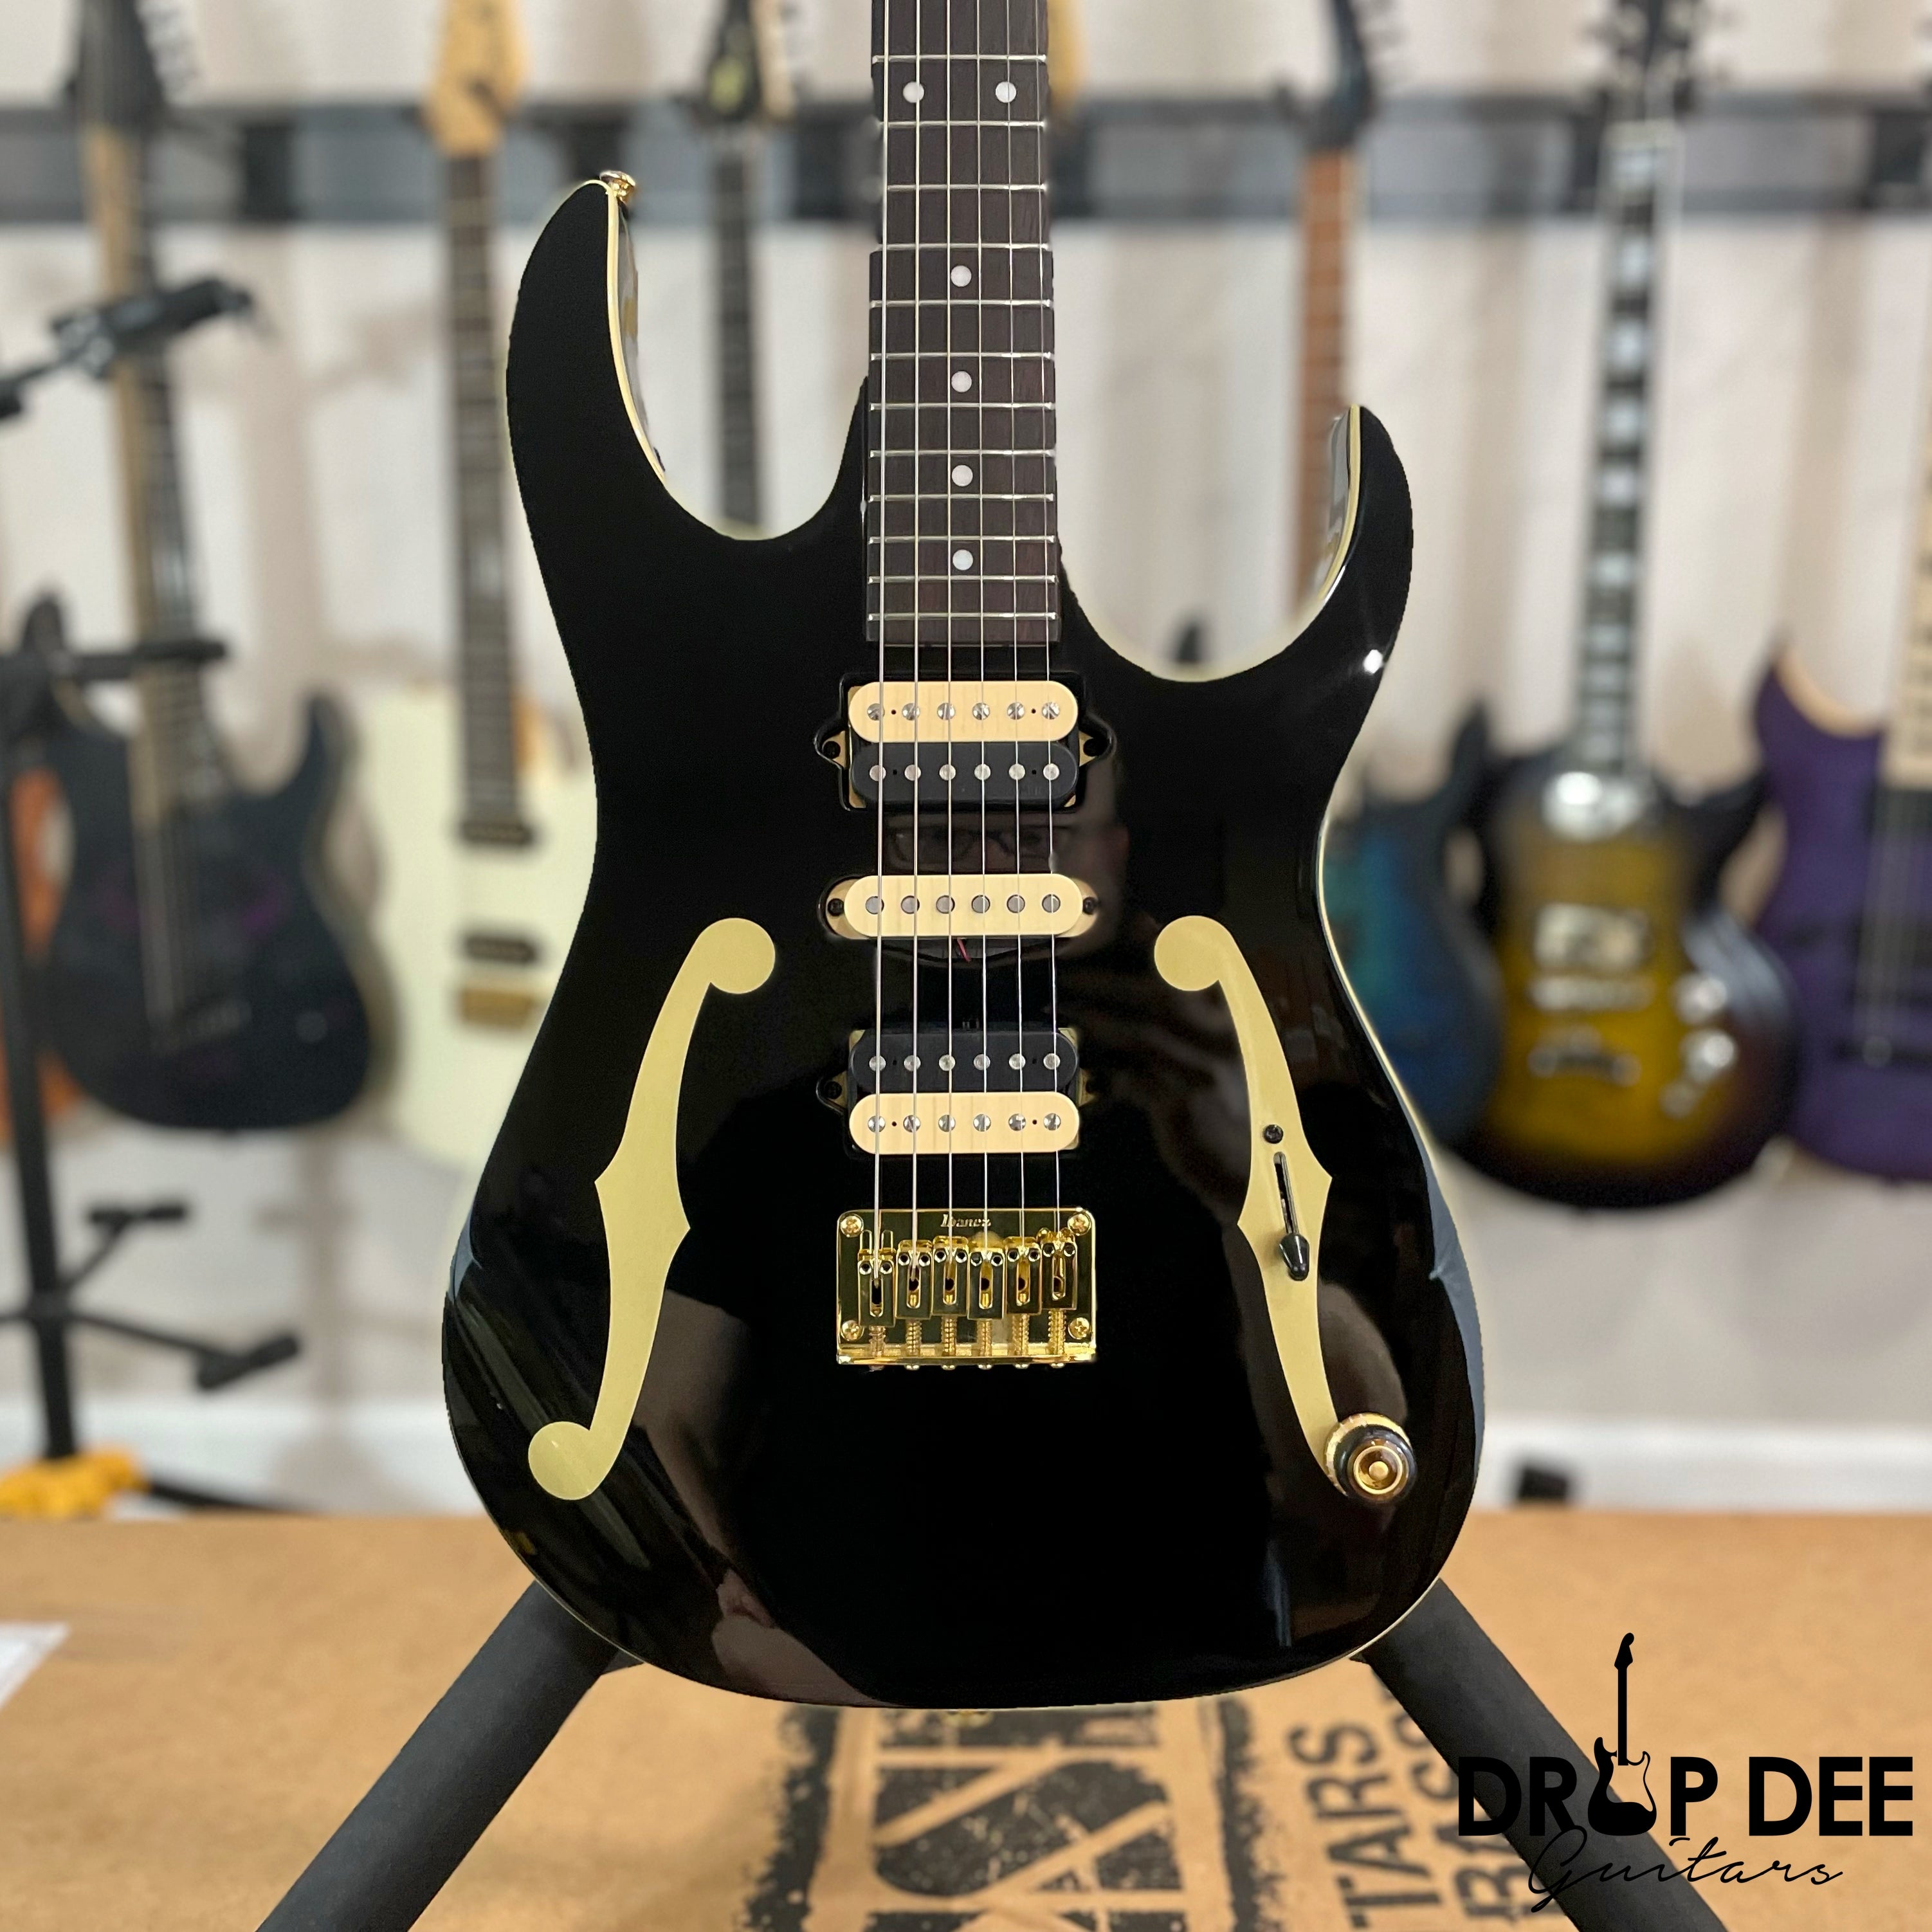 High quality guitars and accessories from Guitar People™ Sweden